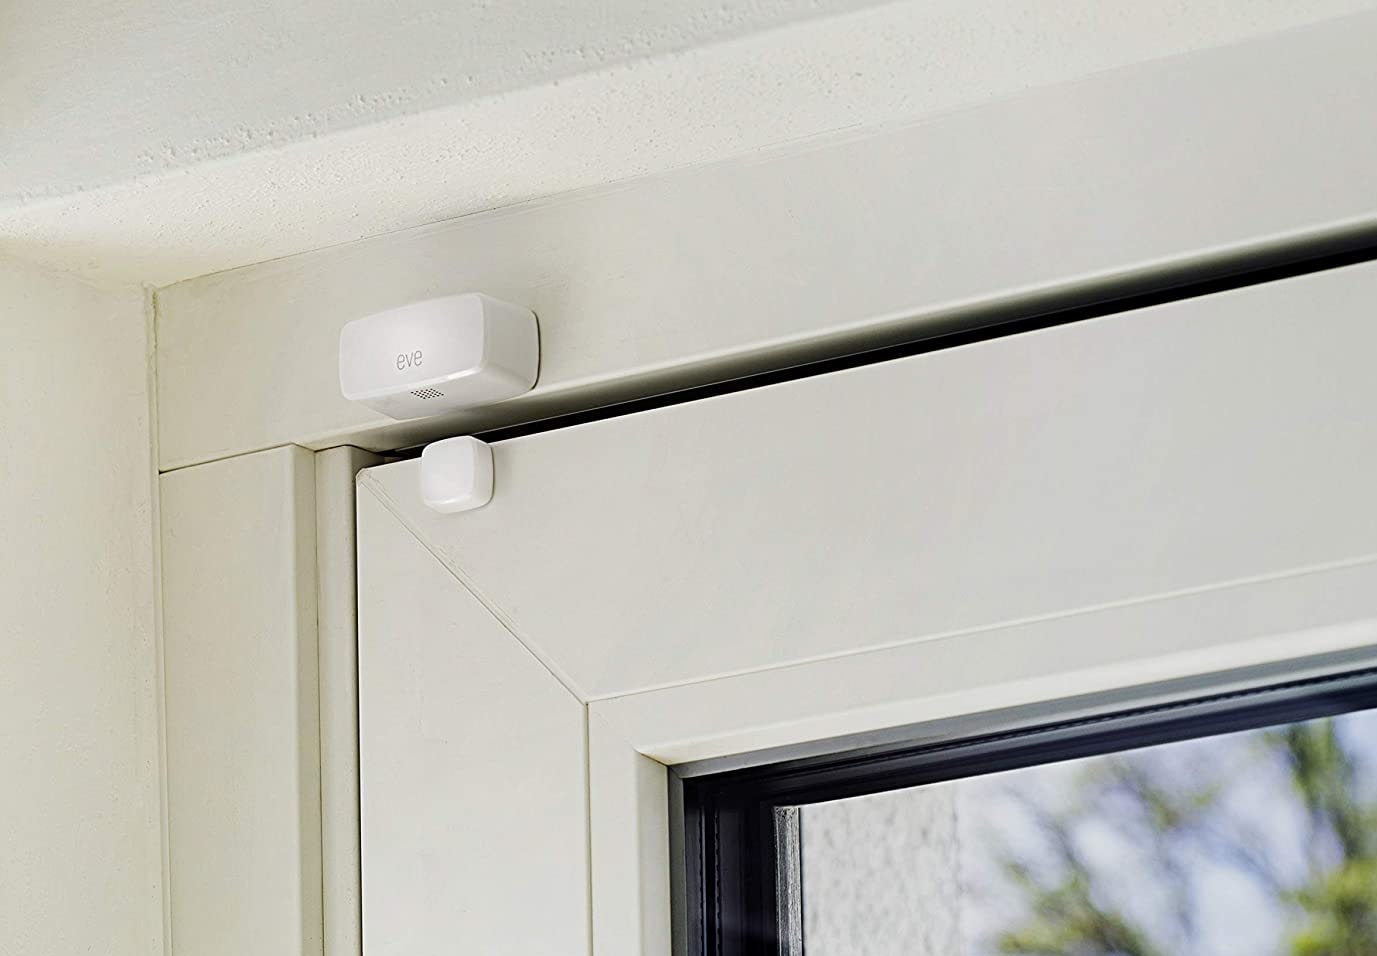 The Eve Motion sensor is one of the devices to receive the new firmware update with Matter support.